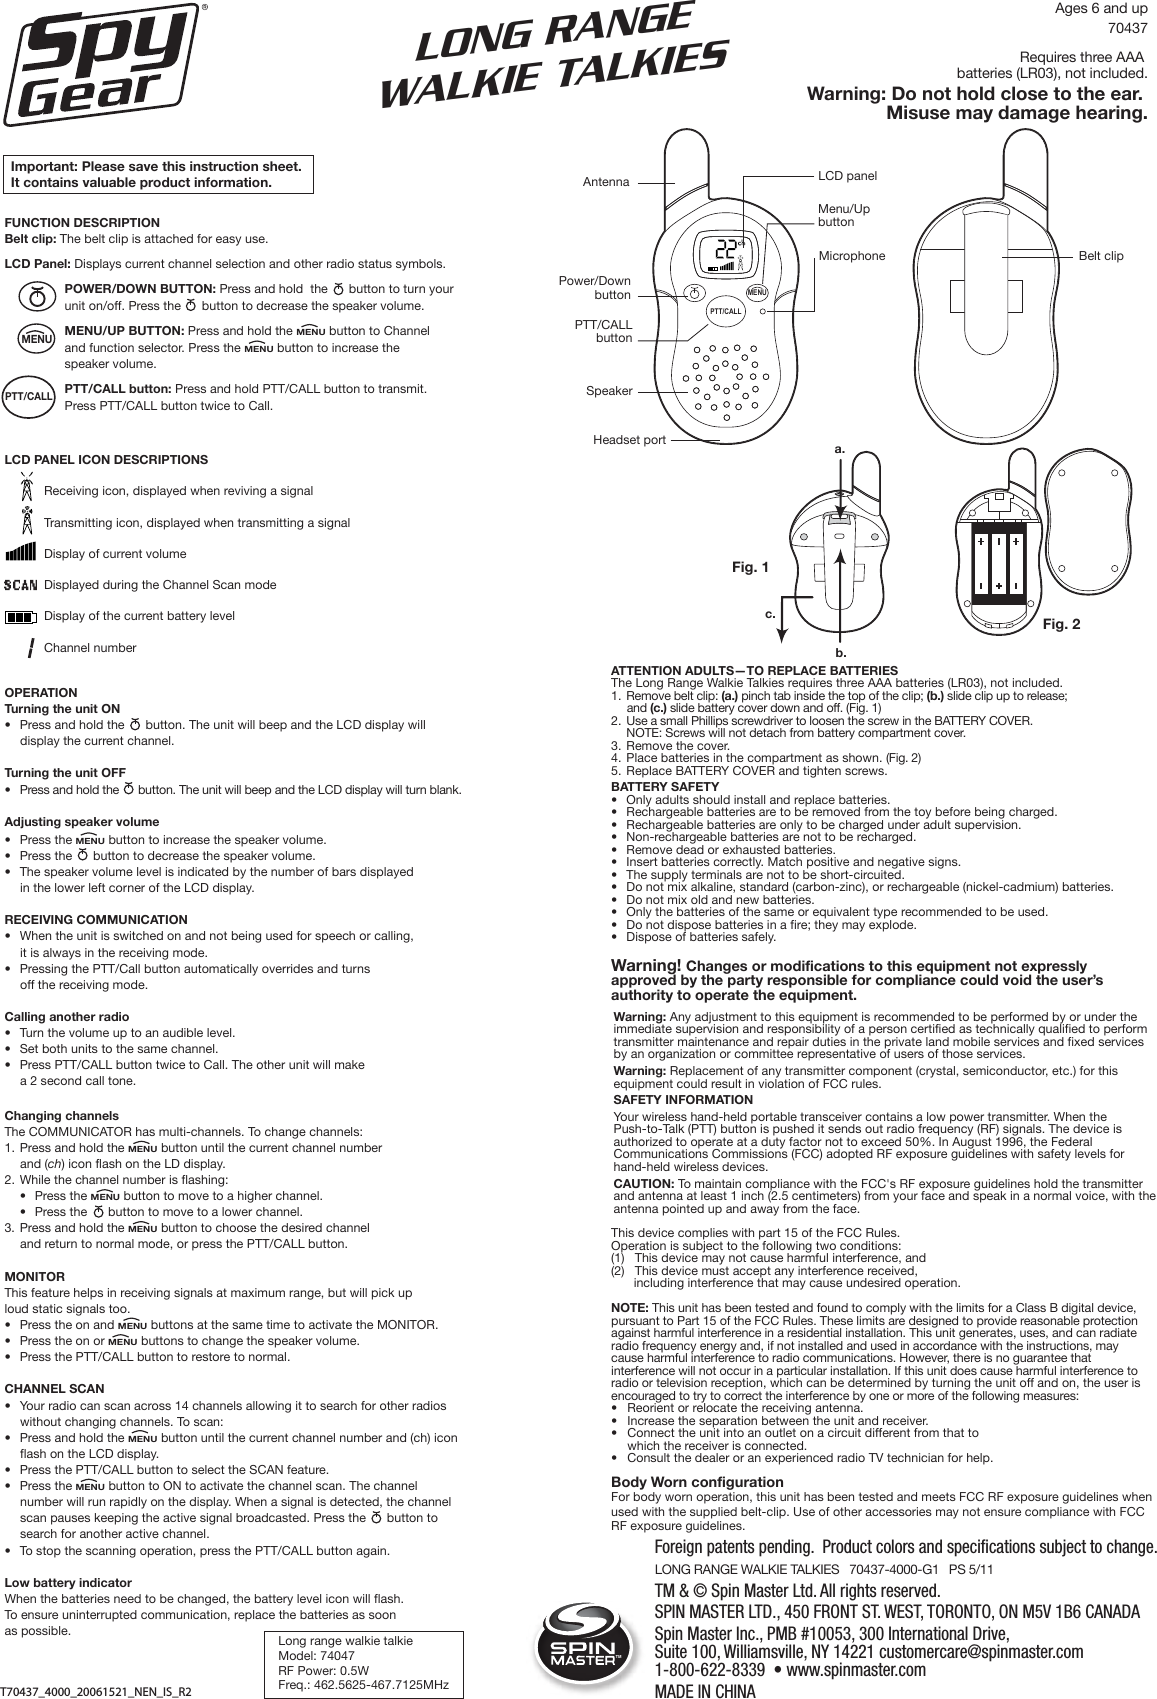 Fig. 2MENUPTT/CALLAntennaSpeakerHeadset portPower/DownbuttonPTT/CALLbuttonLCD panelMenu/Up buttonMicrophoneFig. 1a.c.b.Belt clipLONG RANGEWALKIE TALKIESImportant: Please save this instruction sheet. It contains valuable product information.LONG RANGE WALKIE TALKIES   70437-4000-G1   PS 5/11     Foreign patents pending.  Product colors and specifications subject to change.ATTENTION ADULTS—TO REPLACE BATTERIESThe Long Range Walkie Talkies requires three AAA batteries (LR03), not included.1. Remove belt clip: (a.) pinch tab inside the top of the clip; (b.) slide clip up to release; and (c.) slide battery cover down and off. (Fig. 1)2. Use a small Phillips screwdriver to loosen the screw in the BATTERY COVER. NOTE: Screws will not detach from battery compartment cover. 3. Remove the cover.4. Place batteries in the compartment as shown. (Fig. 2)5. Replace BATTERY COVER and tighten screws.BATTERY SAFETY•  Only adults should install and replace batteries.•  Rechargeable batteries are to be removed from the toy before being charged.•  Rechargeable batteries are only to be charged under adult supervision. •  Non-rechargeable batteries are not to be recharged.•  Remove dead or exhausted batteries.•  Insert batteries correctly. Match positive and negative signs.•  The supply terminals are not to be short-circuited.•  Do not mix alkaline, standard (carbon-zinc), or rechargeable (nickel-cadmium) batteries.•  Do not mix old and new batteries.•  Only the batteries of the same or equivalent type recommended to be used.•  Do not dispose batteries in a fire; they may explode.•  Dispose of batteries safely.Warning! Changes or modifications to this equipment not expressly approved by the party responsible for compliance could void the user’s authority to operate the equipment. This device complies with part 15 of the FCC Rules. Operation is subject to the following two conditions: (1)   This device may not cause harmful interference, and (2)   This device must accept any interference received, including interference that may cause undesired operation.NOTE: This unit has been tested and found to comply with the limits for a Class B digital device, pursuant to Part 15 of the FCC Rules. These limits are designed to provide reasonable protection against harmful interference in a residential installation. This unit generates, uses, and can radiate radio frequency energy and, if not installed and used in accordance with the instructions, may cause harmful interference to radio communications. However, there is no guarantee that interference will not occur in a particular installation. If this unit does cause harmful interference to radio or television reception, which can be determined by turning the unit off and on, the user is encouraged to try to correct the interference by one or more of the following measures:   •  Reorient or relocate the receiving antenna.  •   Increase the separation between the unit and receiver.  •  Connect the unit into an outlet on a circuit different from that to which the receiver is connected.  •   Consult the dealer or an experienced radio TV technician for help.Ages 6 and up70437Requires three AAA batteries (LR03), not included.Warning: Do not hold close to the ear. Misuse may damage hearing.Long range walkie talkieModel: 74047RF Power: 0.5WFreq.: 462.5625-467.7125MHzTMTM &amp; © Spin Master Ltd. All rights reserved.SPIN MASTER LTD., 450 FRONT ST. WEST, TORONTO, ON M5V 1B6 CANADA Spin Master Inc., PMB #10053, 300 International Drive, Suite 100, Williamsville, NY 14221 customercare@spinmaster.com 1-800-622-8339  • www.spinmaster.com MADE IN CHINAT70437_4000_20061521_NEN_IS_R2Body Worn configurationFor body worn operation, this unit has been tested and meets FCC RF exposure guidelines when used with the supplied belt-clip. Use of other accessories may not ensure compliance with FCC RF exposure guidelines. Warning: Any adjustment to this equipment is recommended to be performed by or under the immediate supervision and responsibility of a person certified as technically qualified to perform transmitter maintenance and repair duties in the private land mobile services and fixed services by an organization or committee representative of users of those services.Warning: Replacement of any transmitter component (crystal, semiconductor, etc.) for this equipment could result in violation of FCC rules. SAFETY INFORMATION Your wireless hand-held portable transceiver contains a low power transmitter. When the Push-to-Talk (PTT) button is pushed it sends out radio frequency (RF) signals. The device is authorized to operate at a duty factor not to exceed 50%. In August 1996, the Federal Communications Commissions (FCC) adopted RF exposure guidelines with safety levels for hand-held wireless devices. CAUTION: To maintain compliance with the FCC&apos;s RF exposure guidelines hold the transmitter and antenna at least 1 inch (2.5 centimeters) from your face and speak in a normal voice, with the antenna pointed up and away from the face. FUNCTION DESCRIPTIONBelt clip: The belt clip is attached for easy use.LCD Panel: Displays current channel selection and other radio status symbols.POWER/DOWN BUTTON: Press and hold  the      button to turn your unit on/off. Press the      button to decrease the speaker volume.MENU/UP BUTTON: Press and hold the MENU button to Channel and function selector. Press the MENU button to increase the speaker volume.PTT/CALL button: Press and hold PTT/CALL button to transmit. Press PTT/CALL button twice to Call.LCD PANEL ICON DESCRIPTIONSReceiving icon, displayed when reviving a signalTransmitting icon, displayed when transmitting a signalDisplay of current volumeDisplayed during the Channel Scan modeDisplay of the current battery levelChannel number OPERATIONTurning the unit ON•  Press and hold the      button. The unit will beep and the LCD display will display the current channel.Turning the unit OFF•  Press and hold the      button. The unit will beep and the LCD display will turn blank.Adjusting speaker volume•  Press the MENU button to increase the speaker volume.•  Press the      button to decrease the speaker volume.•  The speaker volume level is indicated by the number of bars displayed in the lower left corner of the LCD display.RECEIVING COMMUNICATION•  When the unit is switched on and not being used for speech or calling, it is always in the receiving mode.•  Pressing the PTT/Call button automatically overrides and turns off the receiving mode.Calling another radio•  Turn the volume up to an audible level.•  Set both units to the same channel.•  Press PTT/CALL button twice to Call. The other unit will make a 2 second call tone. Changing channelsThe COMMUNICATOR has multi-channels. To change channels:1.  Press and hold the MENU button until the current channel number and (ch) icon flash on the LD display.2.  While the channel number is flashing:  •  Press the MENU button to move to a higher channel.  •  Press the      button to move to a lower channel.3.  Press and hold the MENU button to choose the desired channel and return to normal mode, or press the PTT/CALL button.MONITORThis feature helps in receiving signals at maximum range, but will pick uploud static signals too.•   Press the on and MENU buttons at the same time to activate the MONITOR.•   Press the on or MENU buttons to change the speaker volume.•   Press the PTT/CALL button to restore to normal.CHANNEL SCAN•  Your radio can scan across 14 channels allowing it to search for other radios without changing channels. To scan:•  Press and hold the MENU button until the current channel number and (ch) icon flash on the LCD display.•  Press the PTT/CALL button to select the SCAN feature.•  Press the MENU button to ON to activate the channel scan. The channel number will run rapidly on the display. When a signal is detected, the channel scan pauses keeping the active signal broadcasted. Press the      button to search for another active channel.•  To stop the scanning operation, press the PTT/CALL button again.Low battery indicatorWhen the batteries need to be changed, the battery level icon will flash. To ensure uninterrupted communication, replace the batteries as soon as possible.MENU PTT/CALL